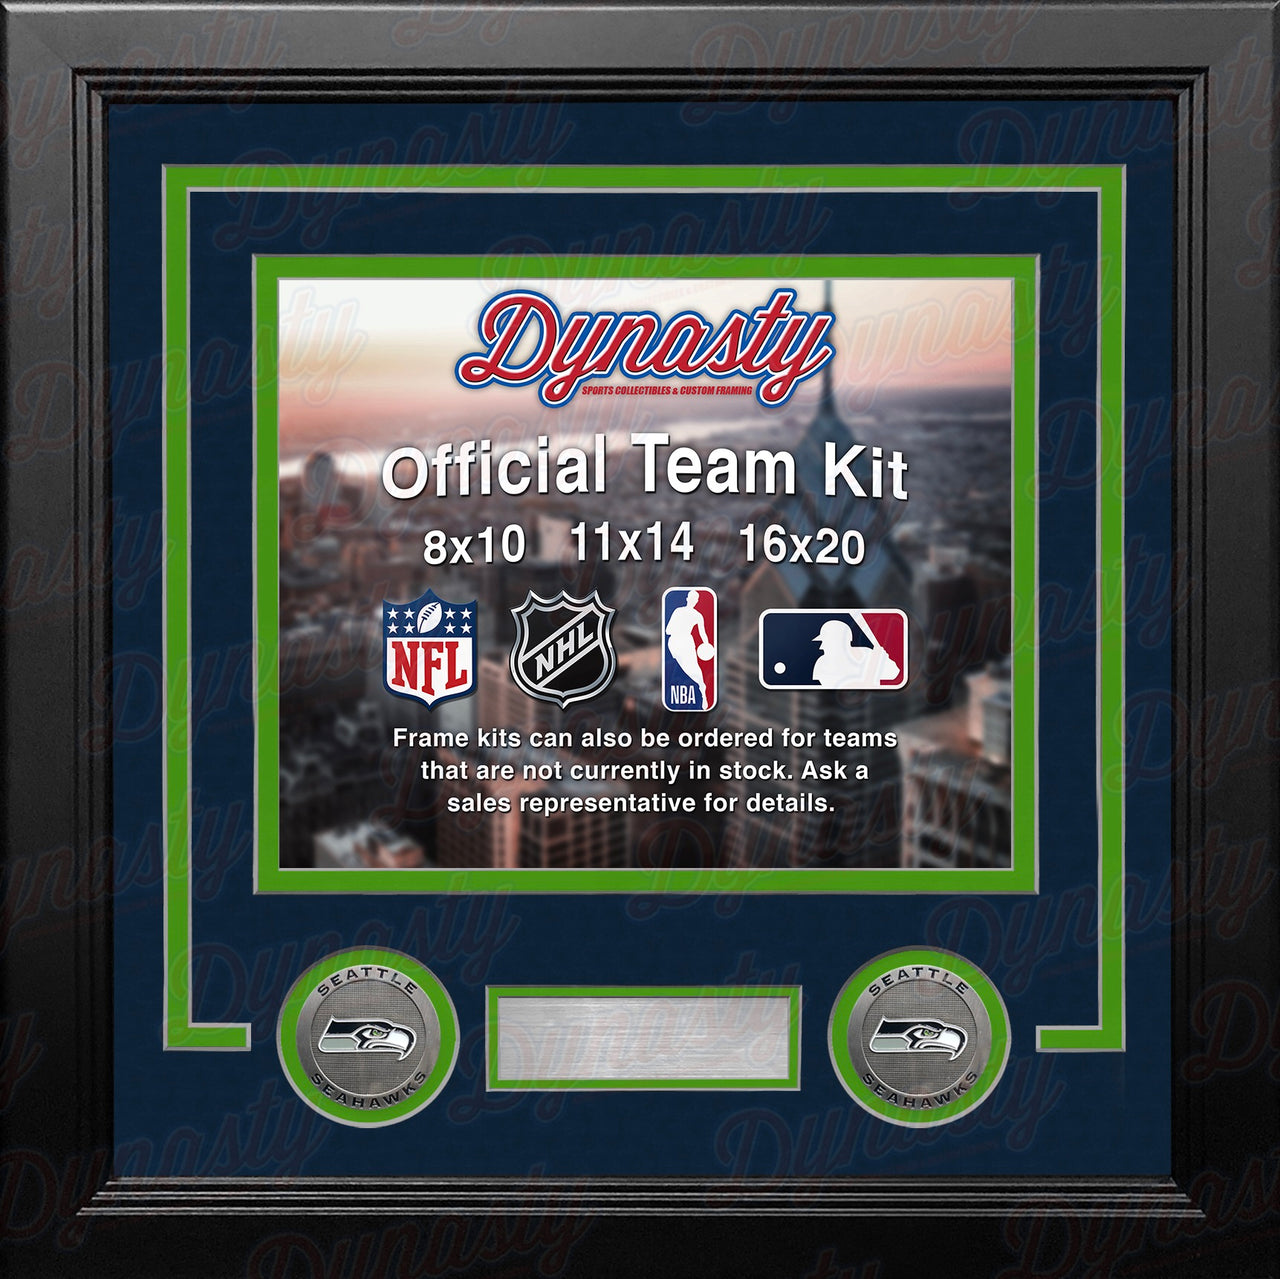 Seattle Seahawks Custom NFL Football 11x14 Picture Frame Kit (Multiple Colors) - Dynasty Sports & Framing 